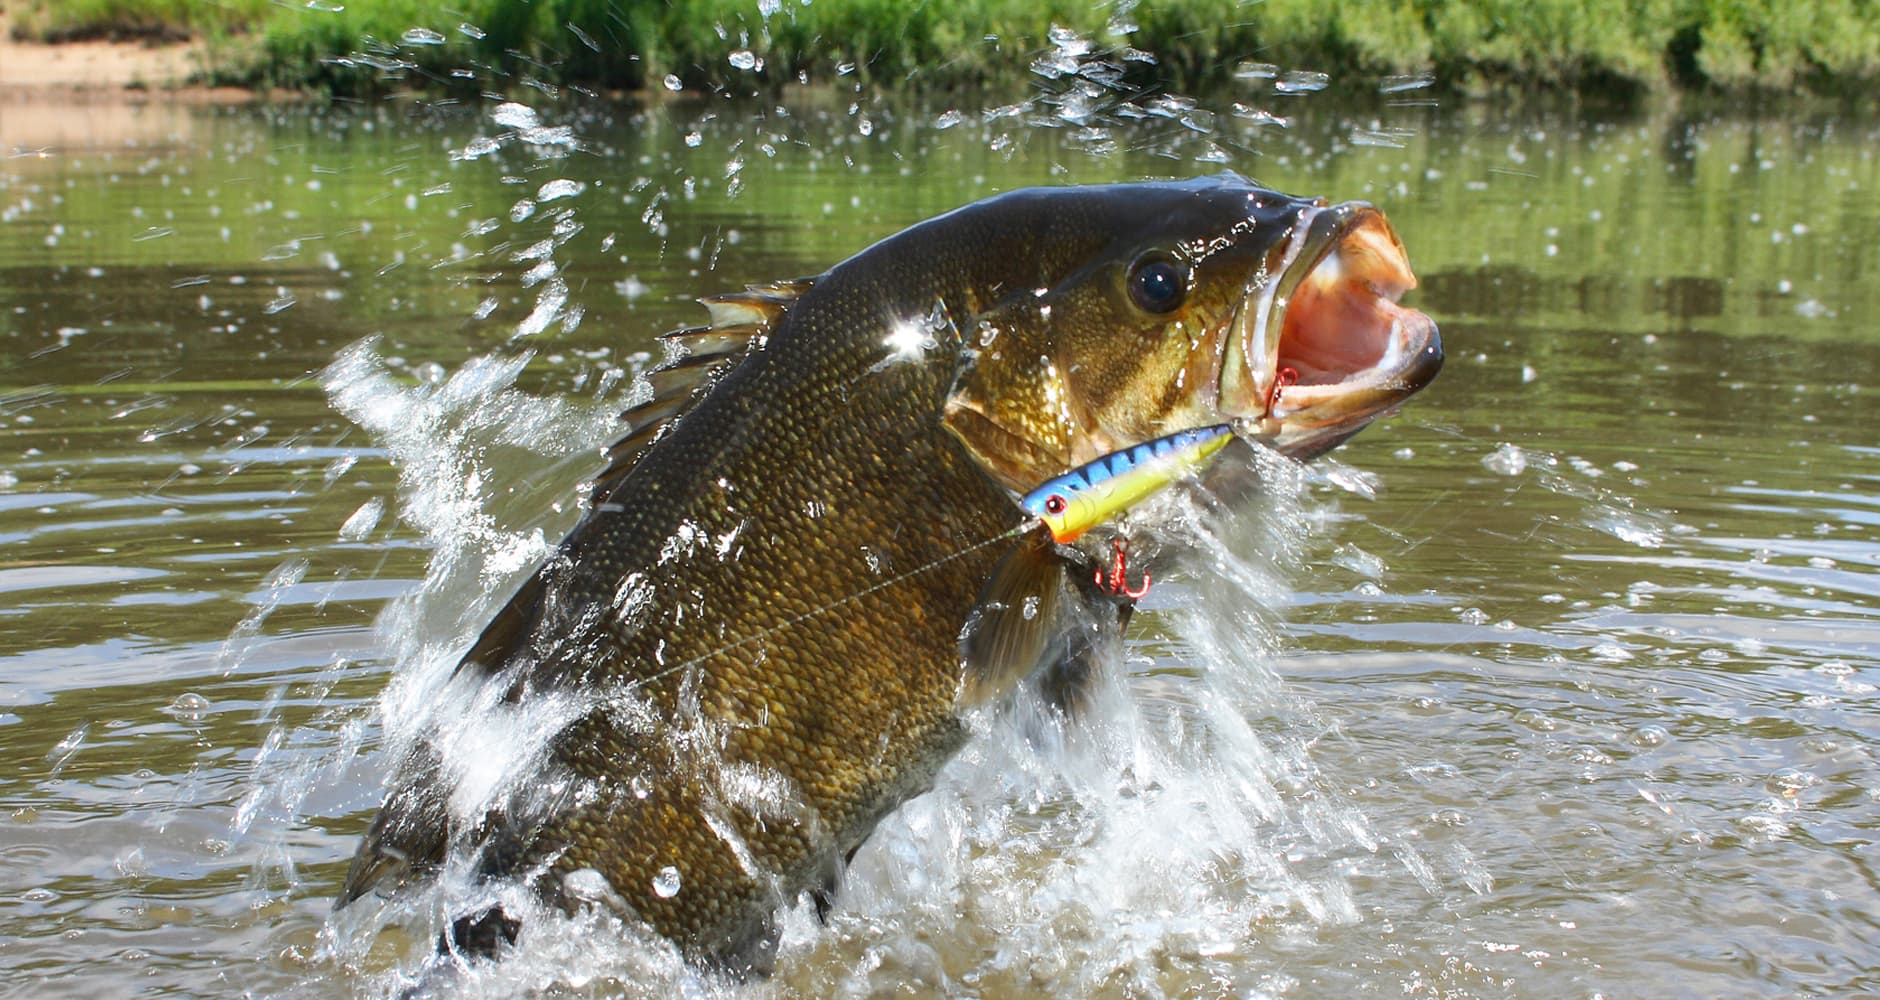 Smallmouth bass are a favorite fishing catch of the Midwest and Great Lakes areas.